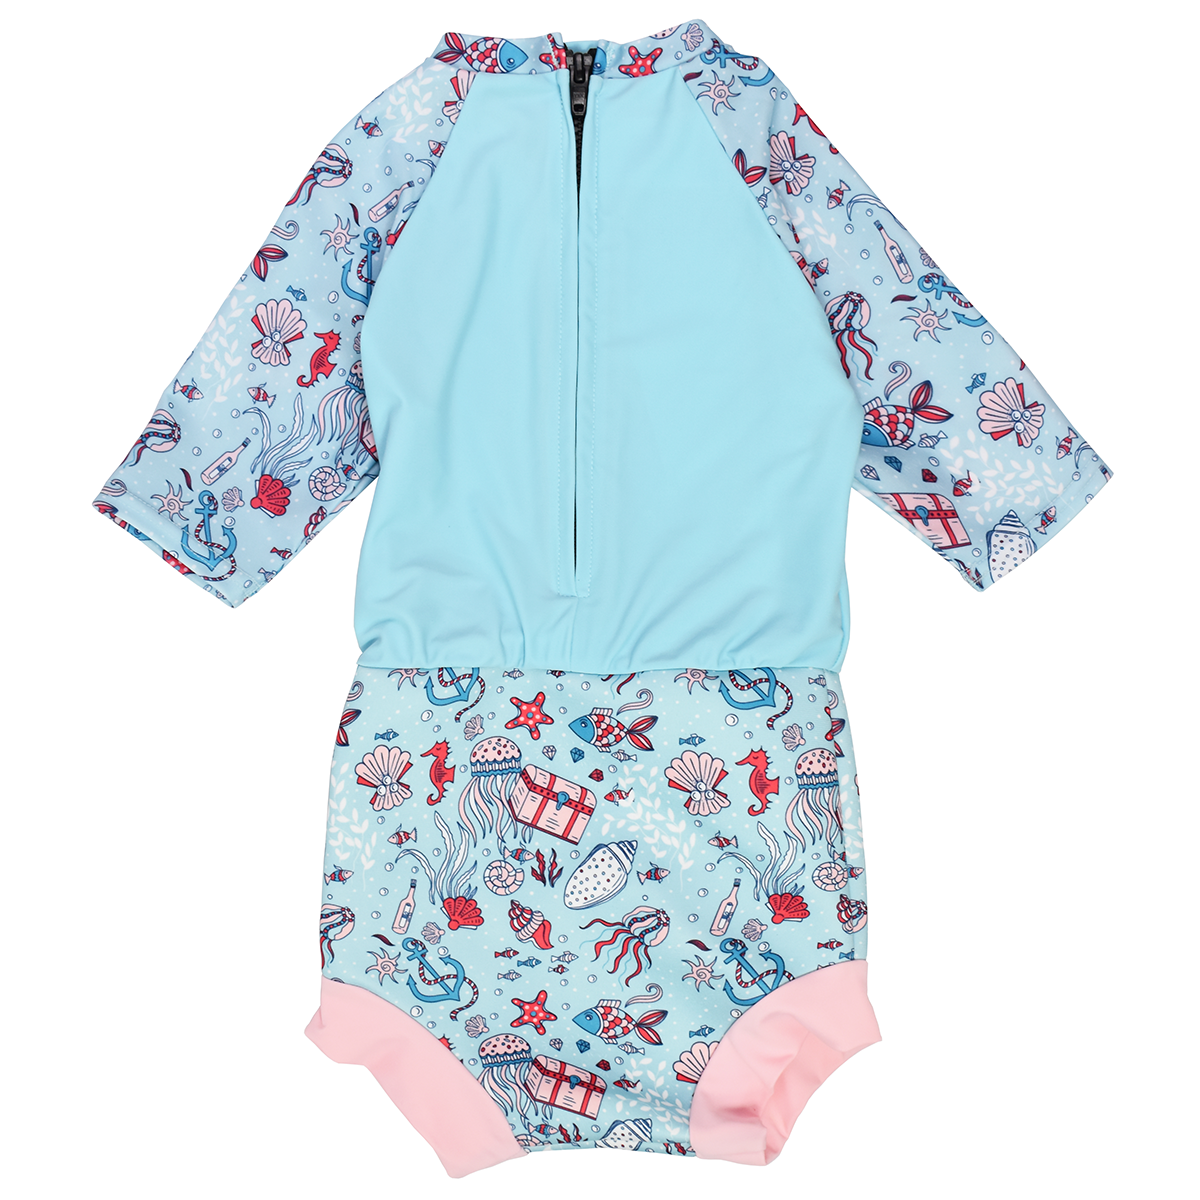 Happy Nappy Sunsuit in baby blue with light pink trims and under the sea themed print, including treasure chests, anchors, jellyfish, fish and more. Back.